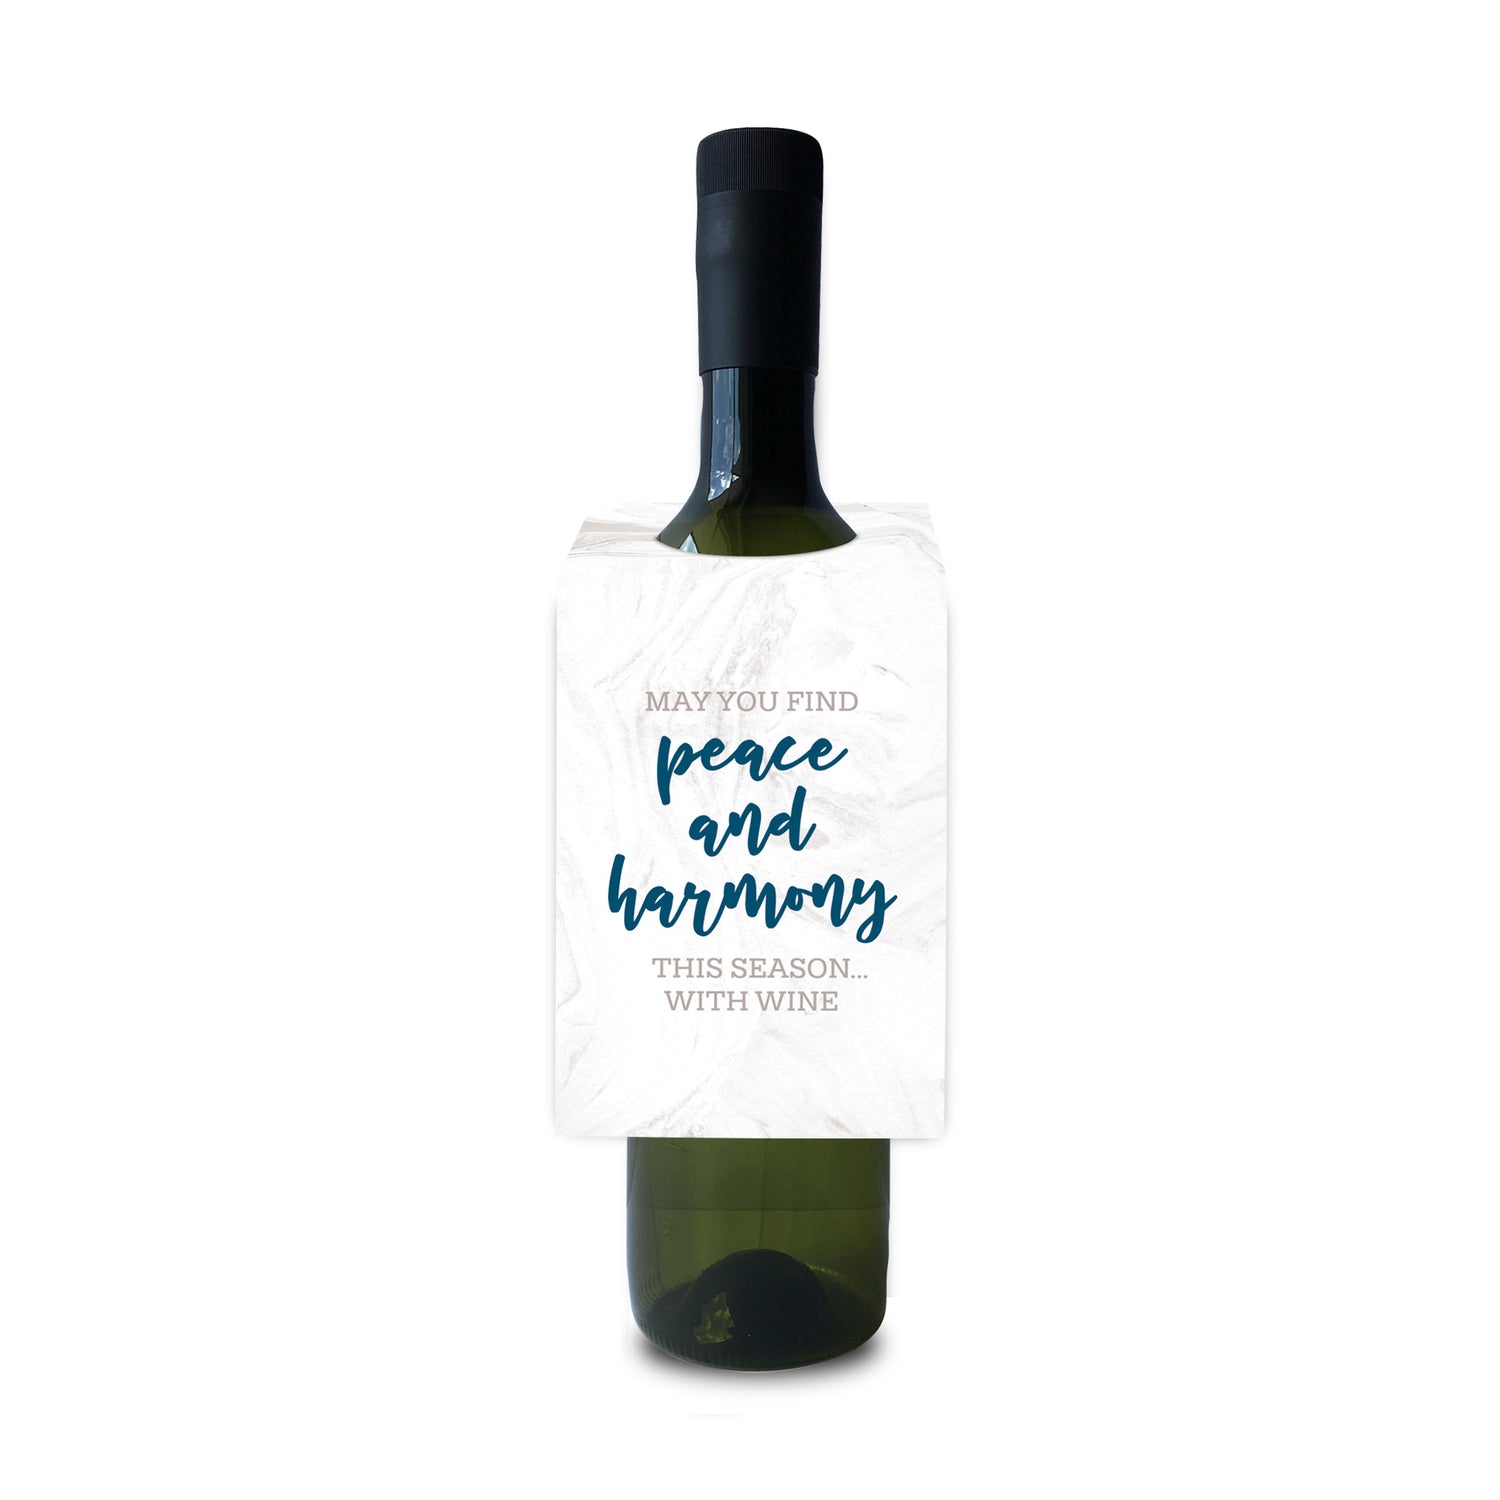 May you find peace and harmony this season with wine holiday wine and spirit tag by I&